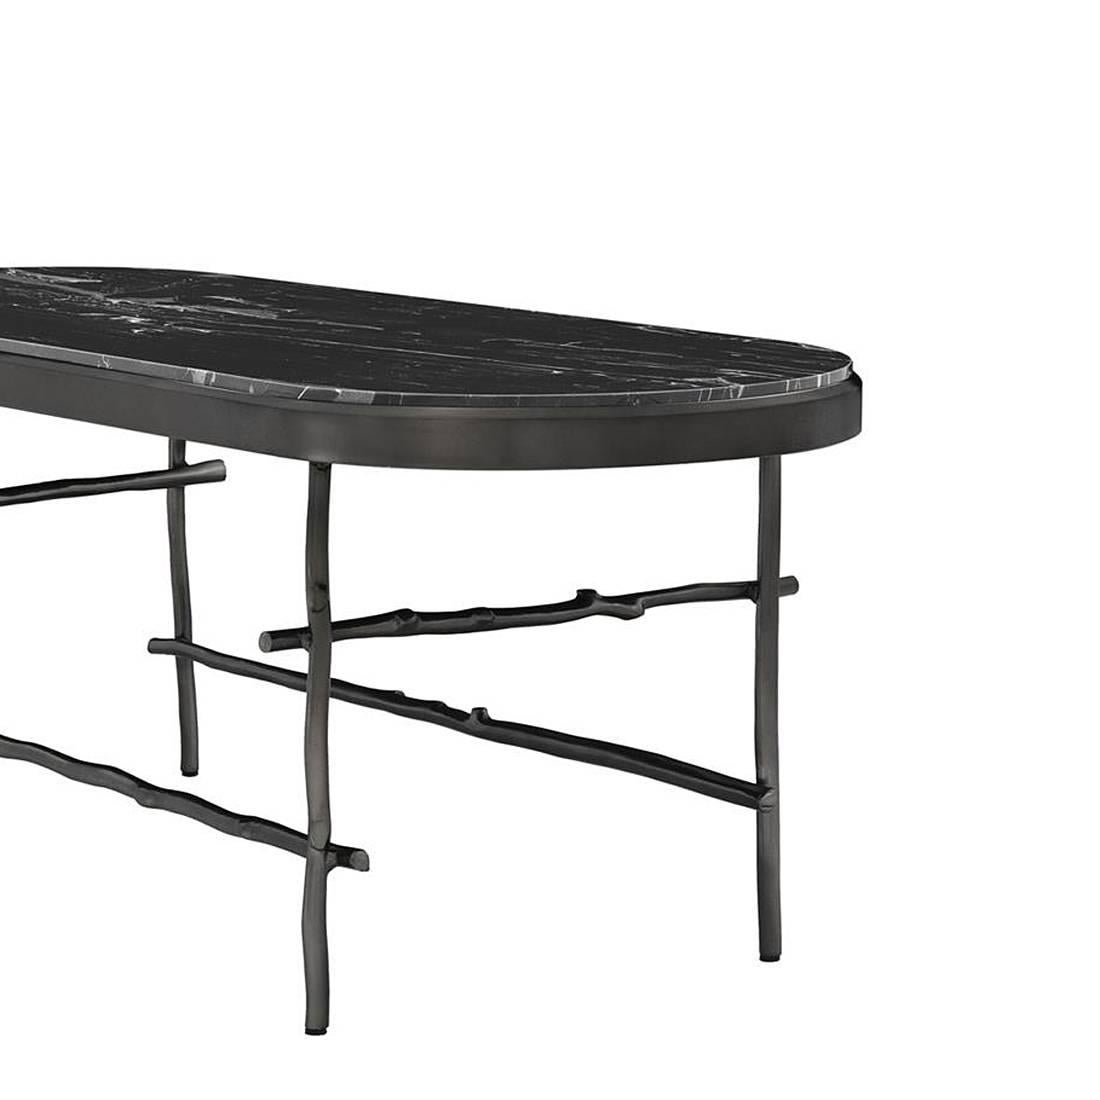 Blackened Black Branches Long Coffee Table with Black Marble Top